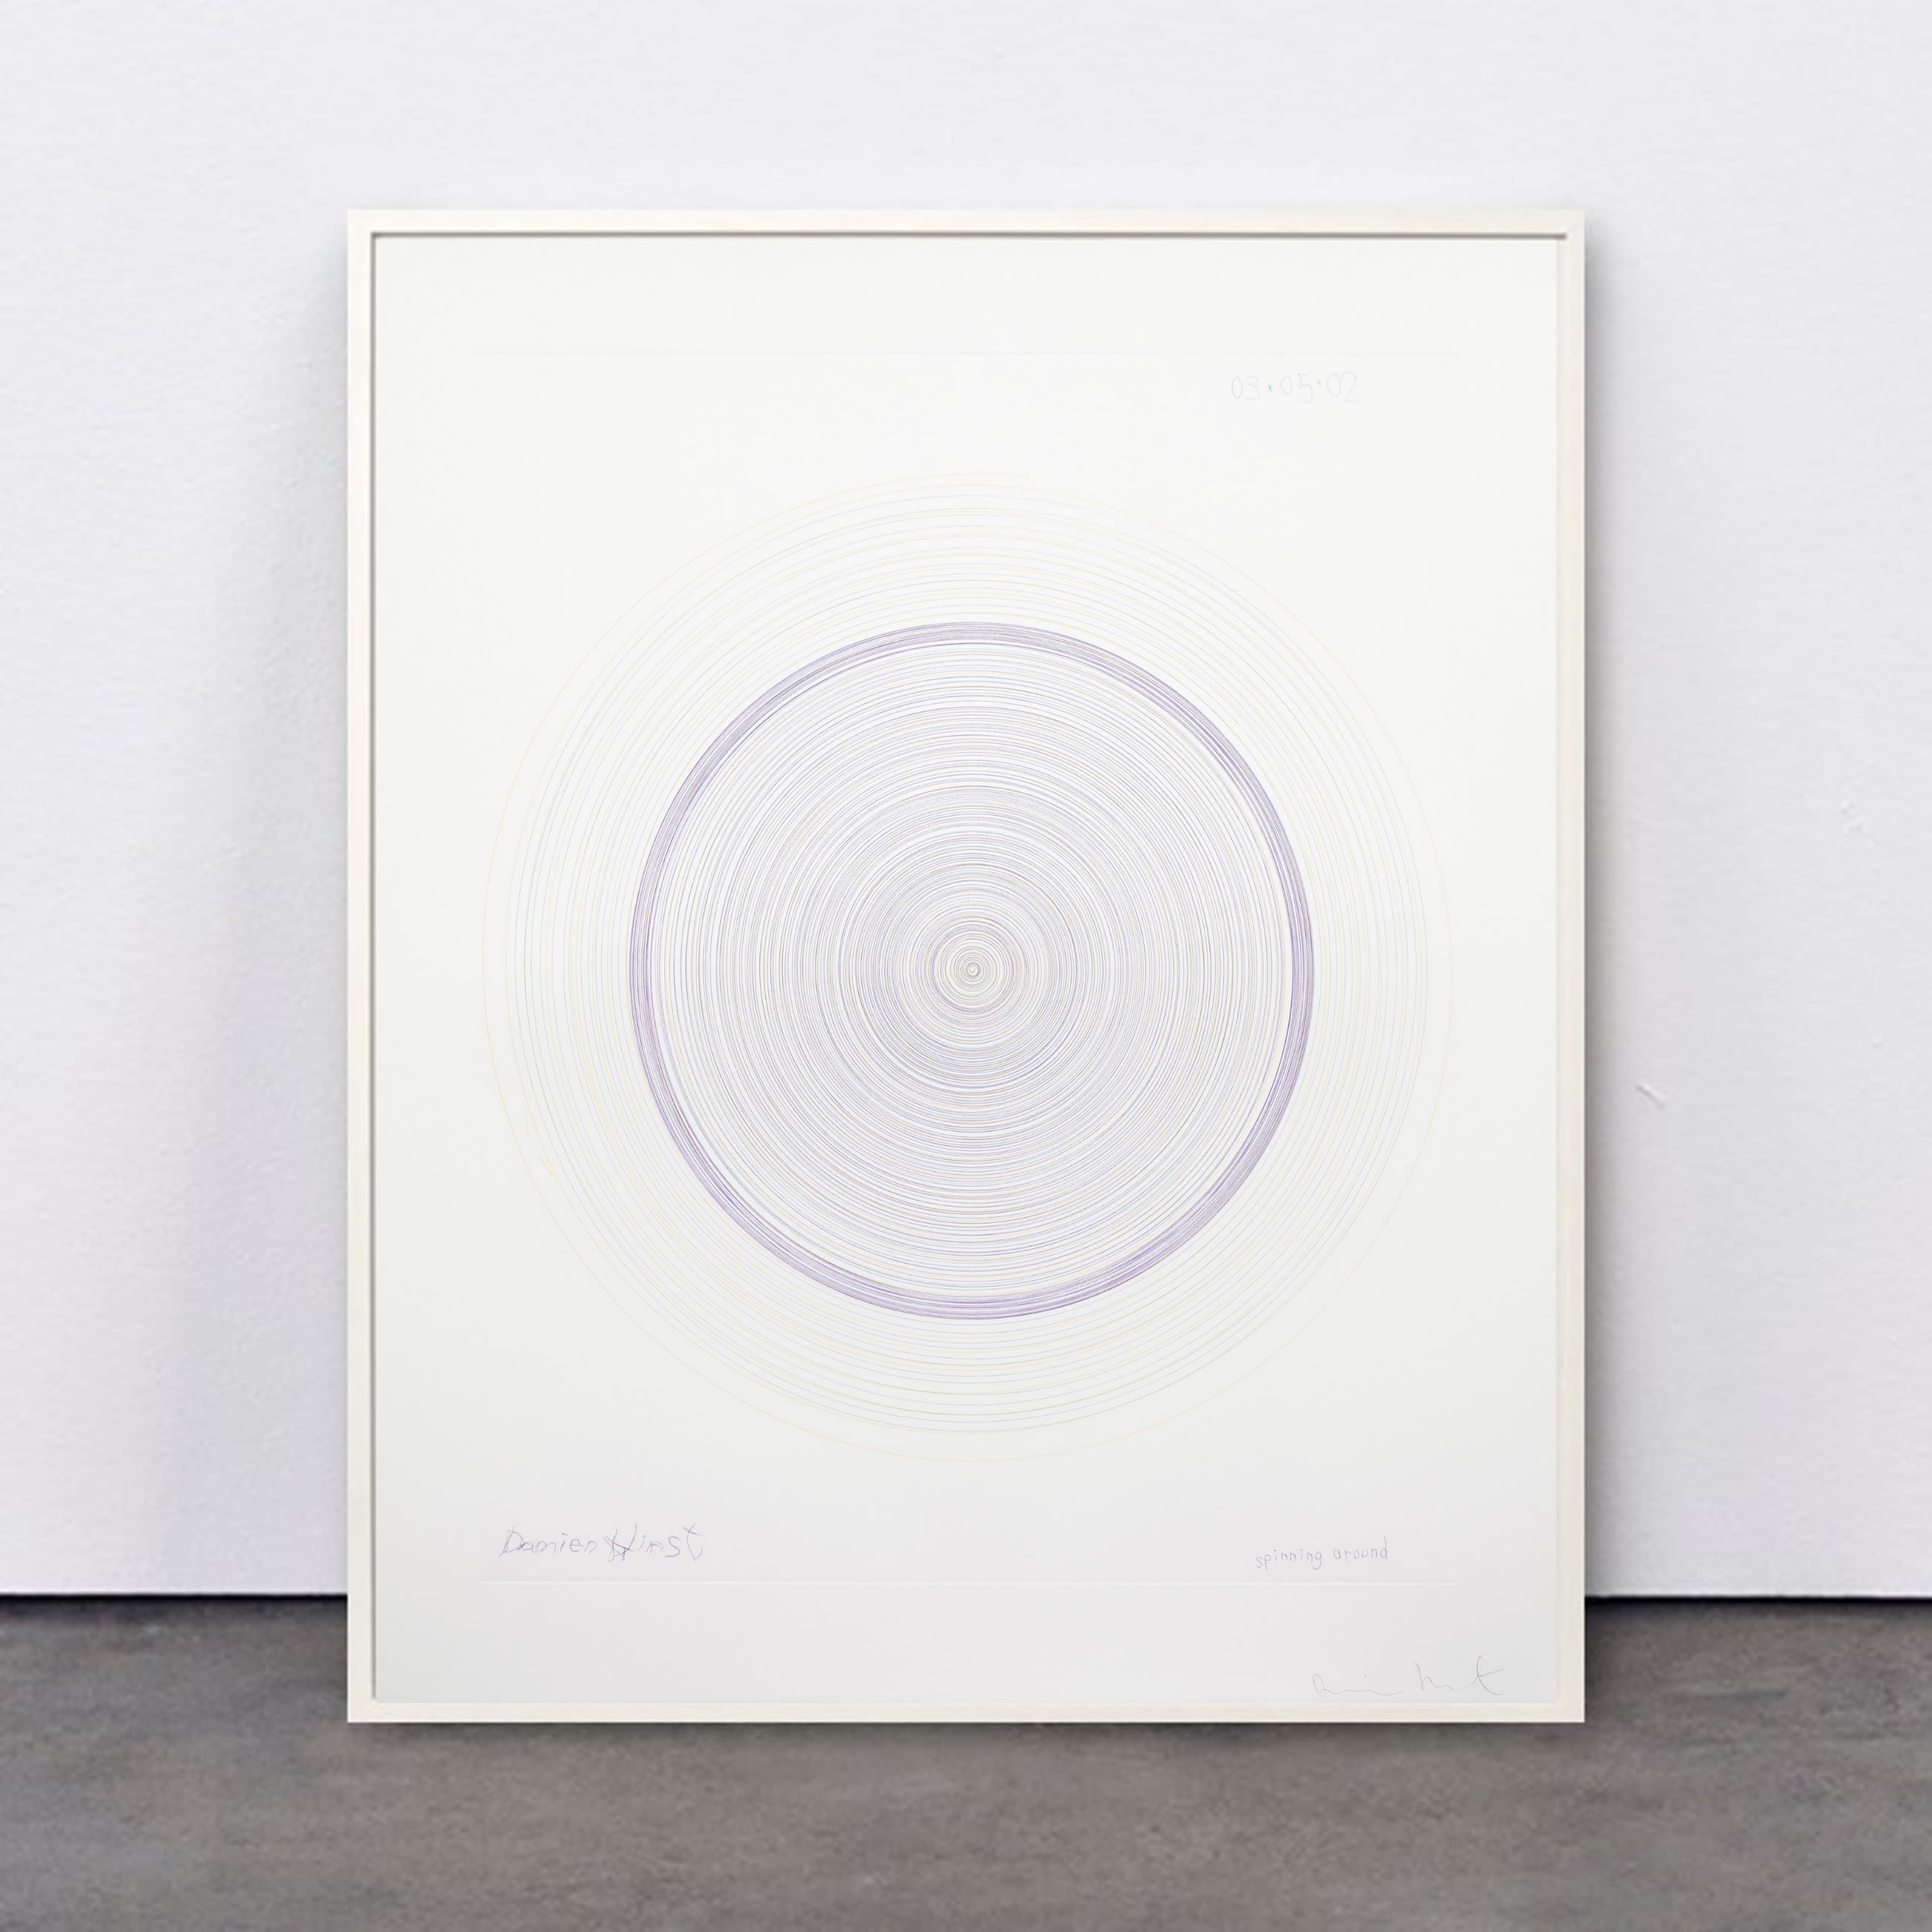 Spinning Around (from In a Spin, the Action of the World on Things, Volume II)-Damien Hirst-1